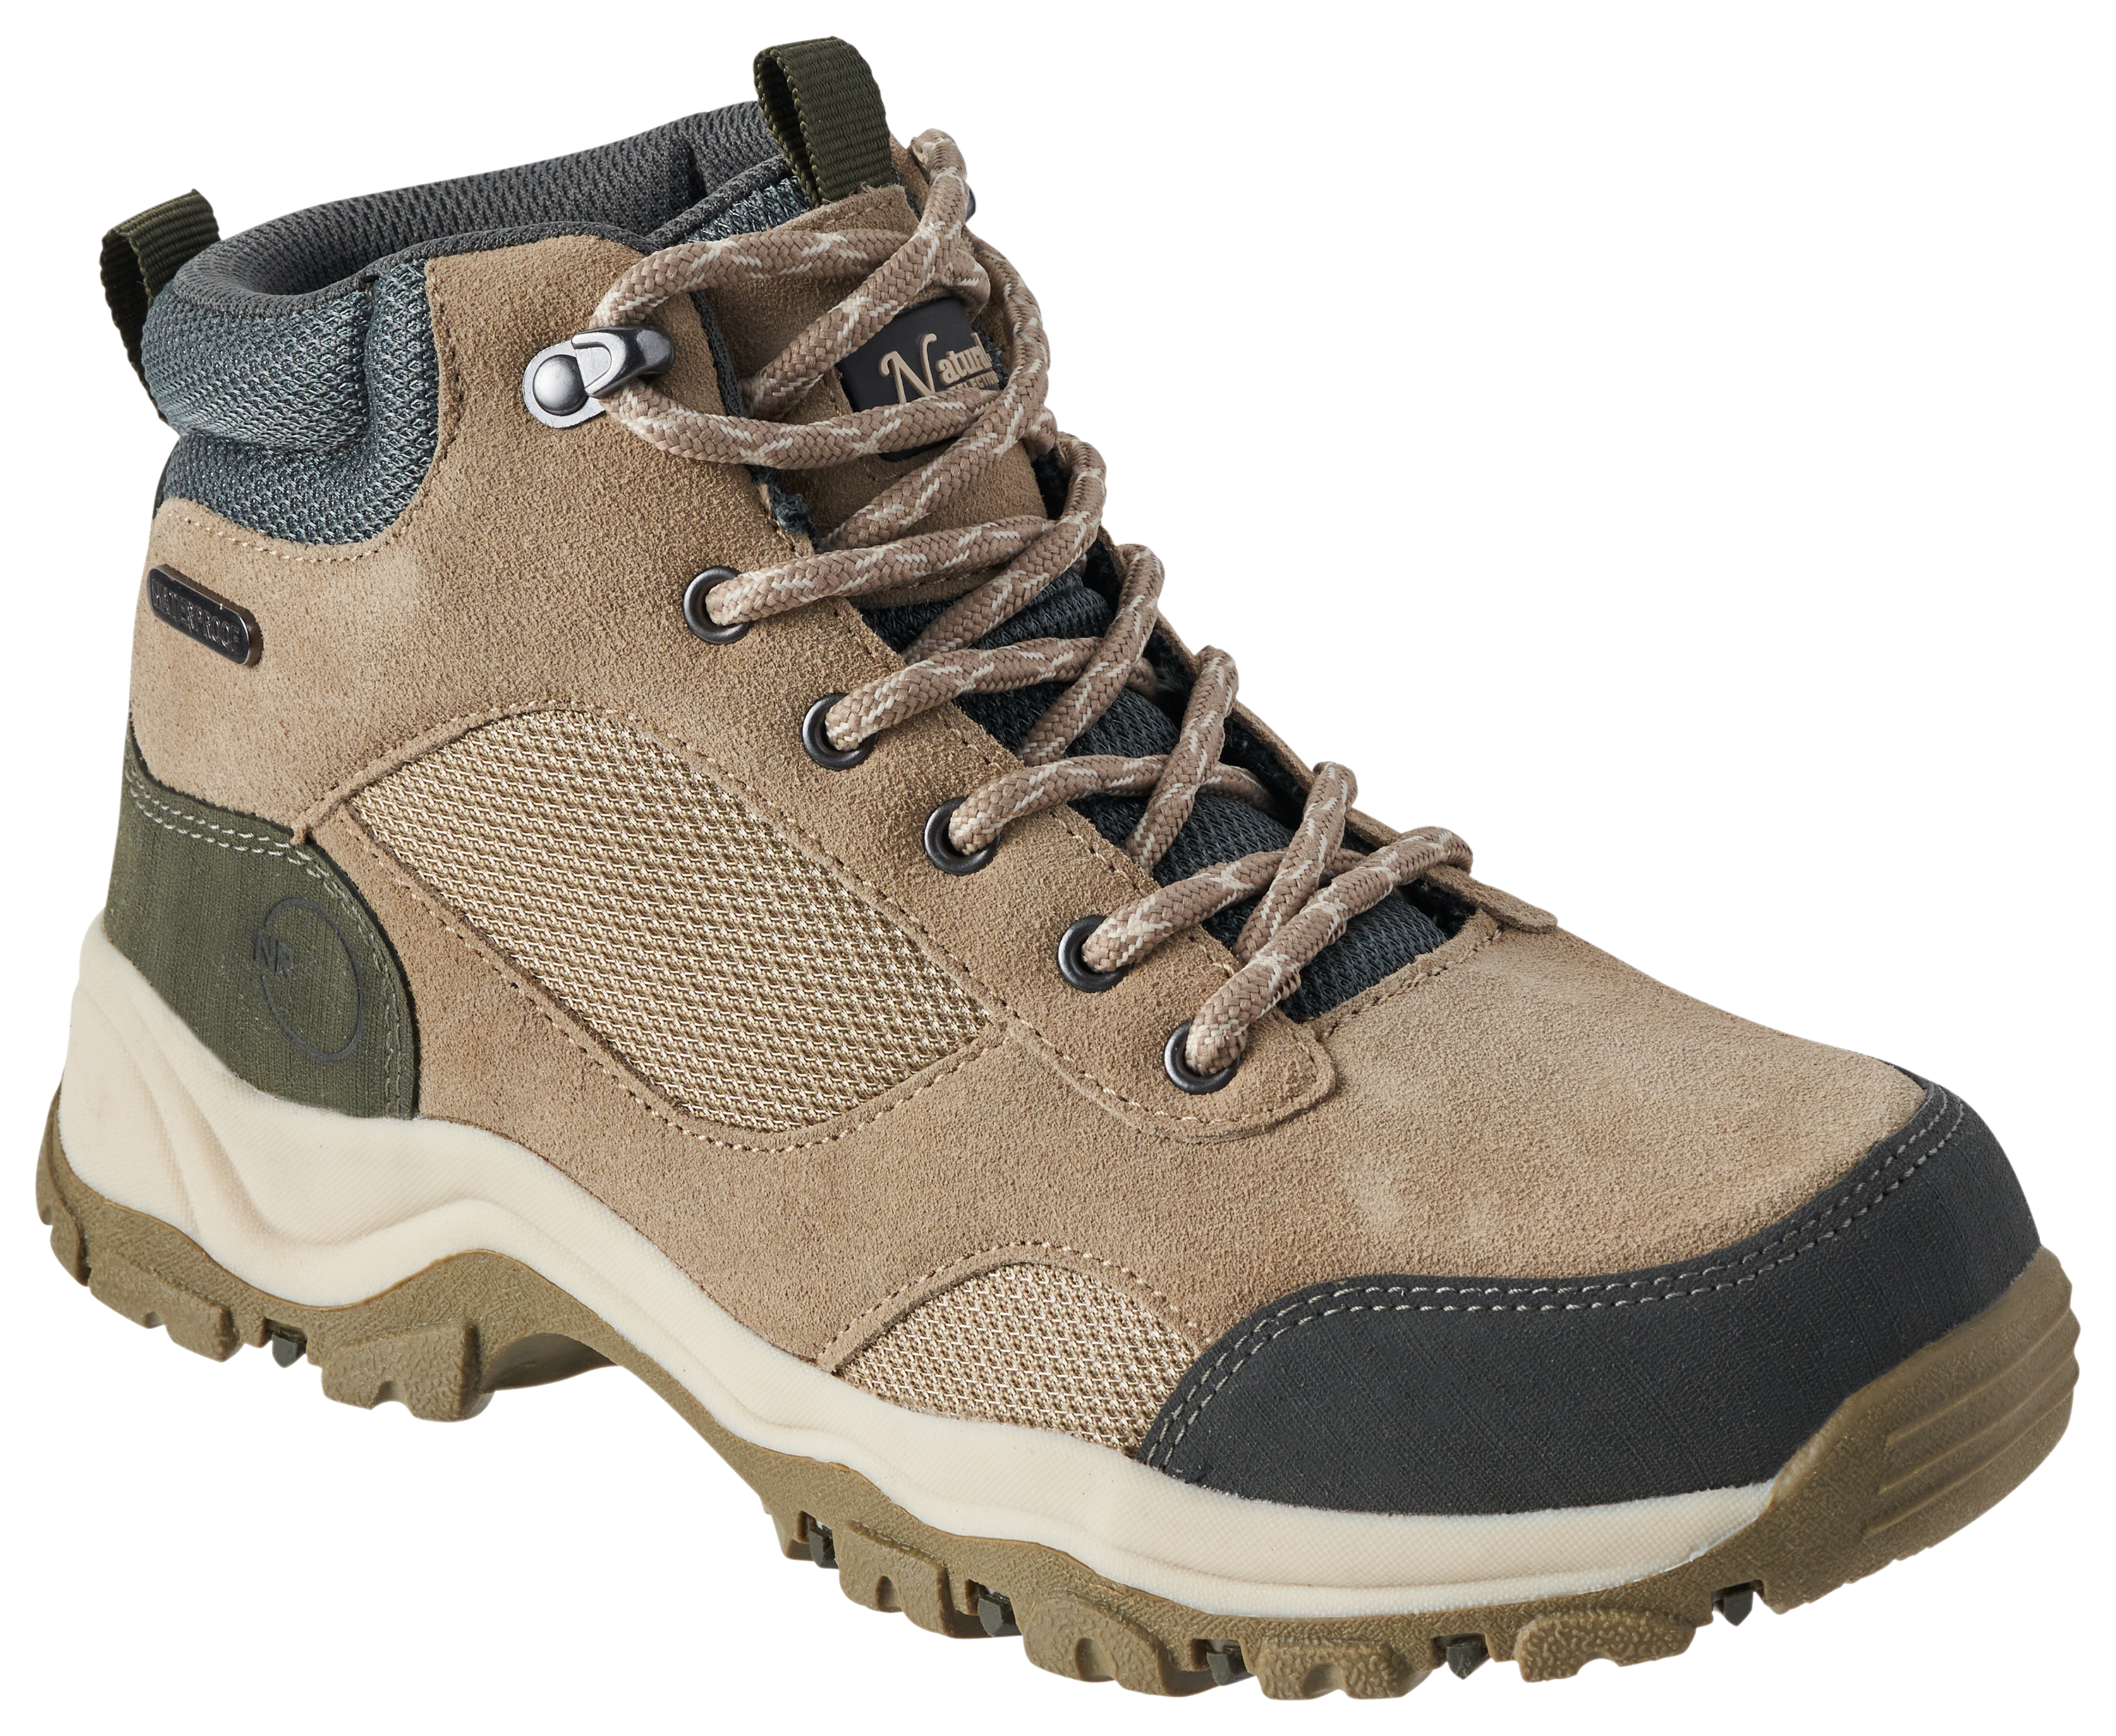 Natural Reflections Skyline II Mid Waterproof Hiking Boots for Ladies - Tan/Charcoal - 9M